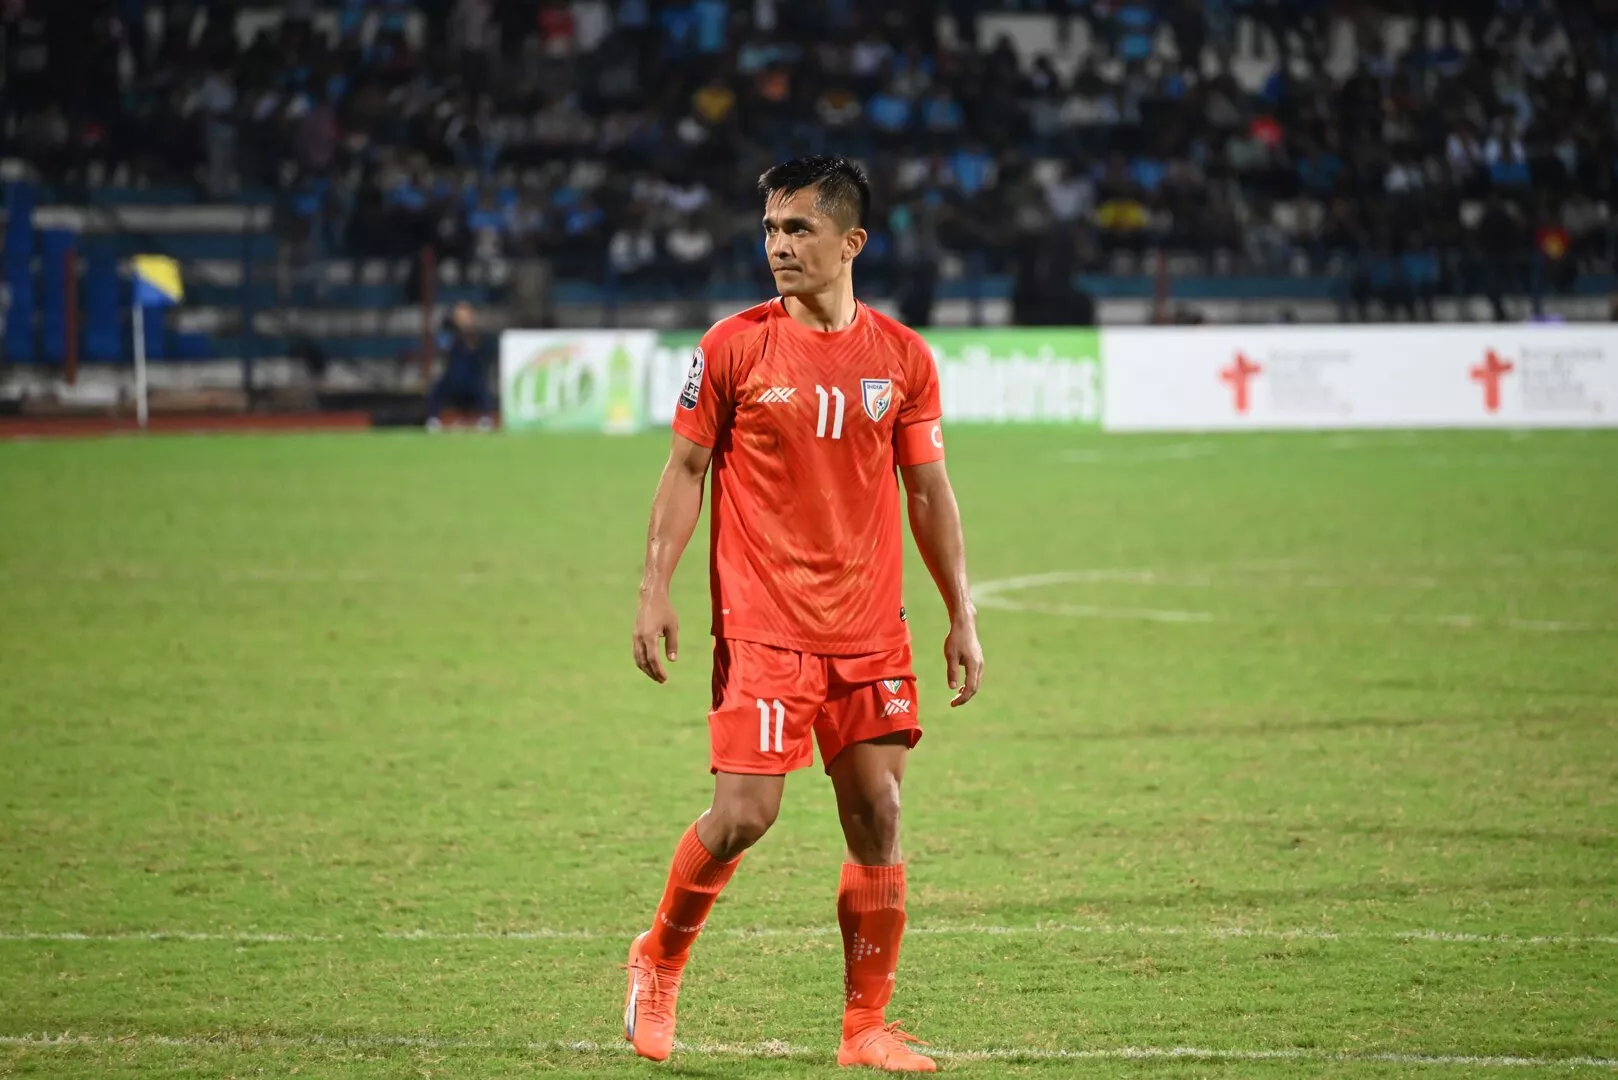 The more we play better teams, the better our preparations will be, opines Sunil Chhetri